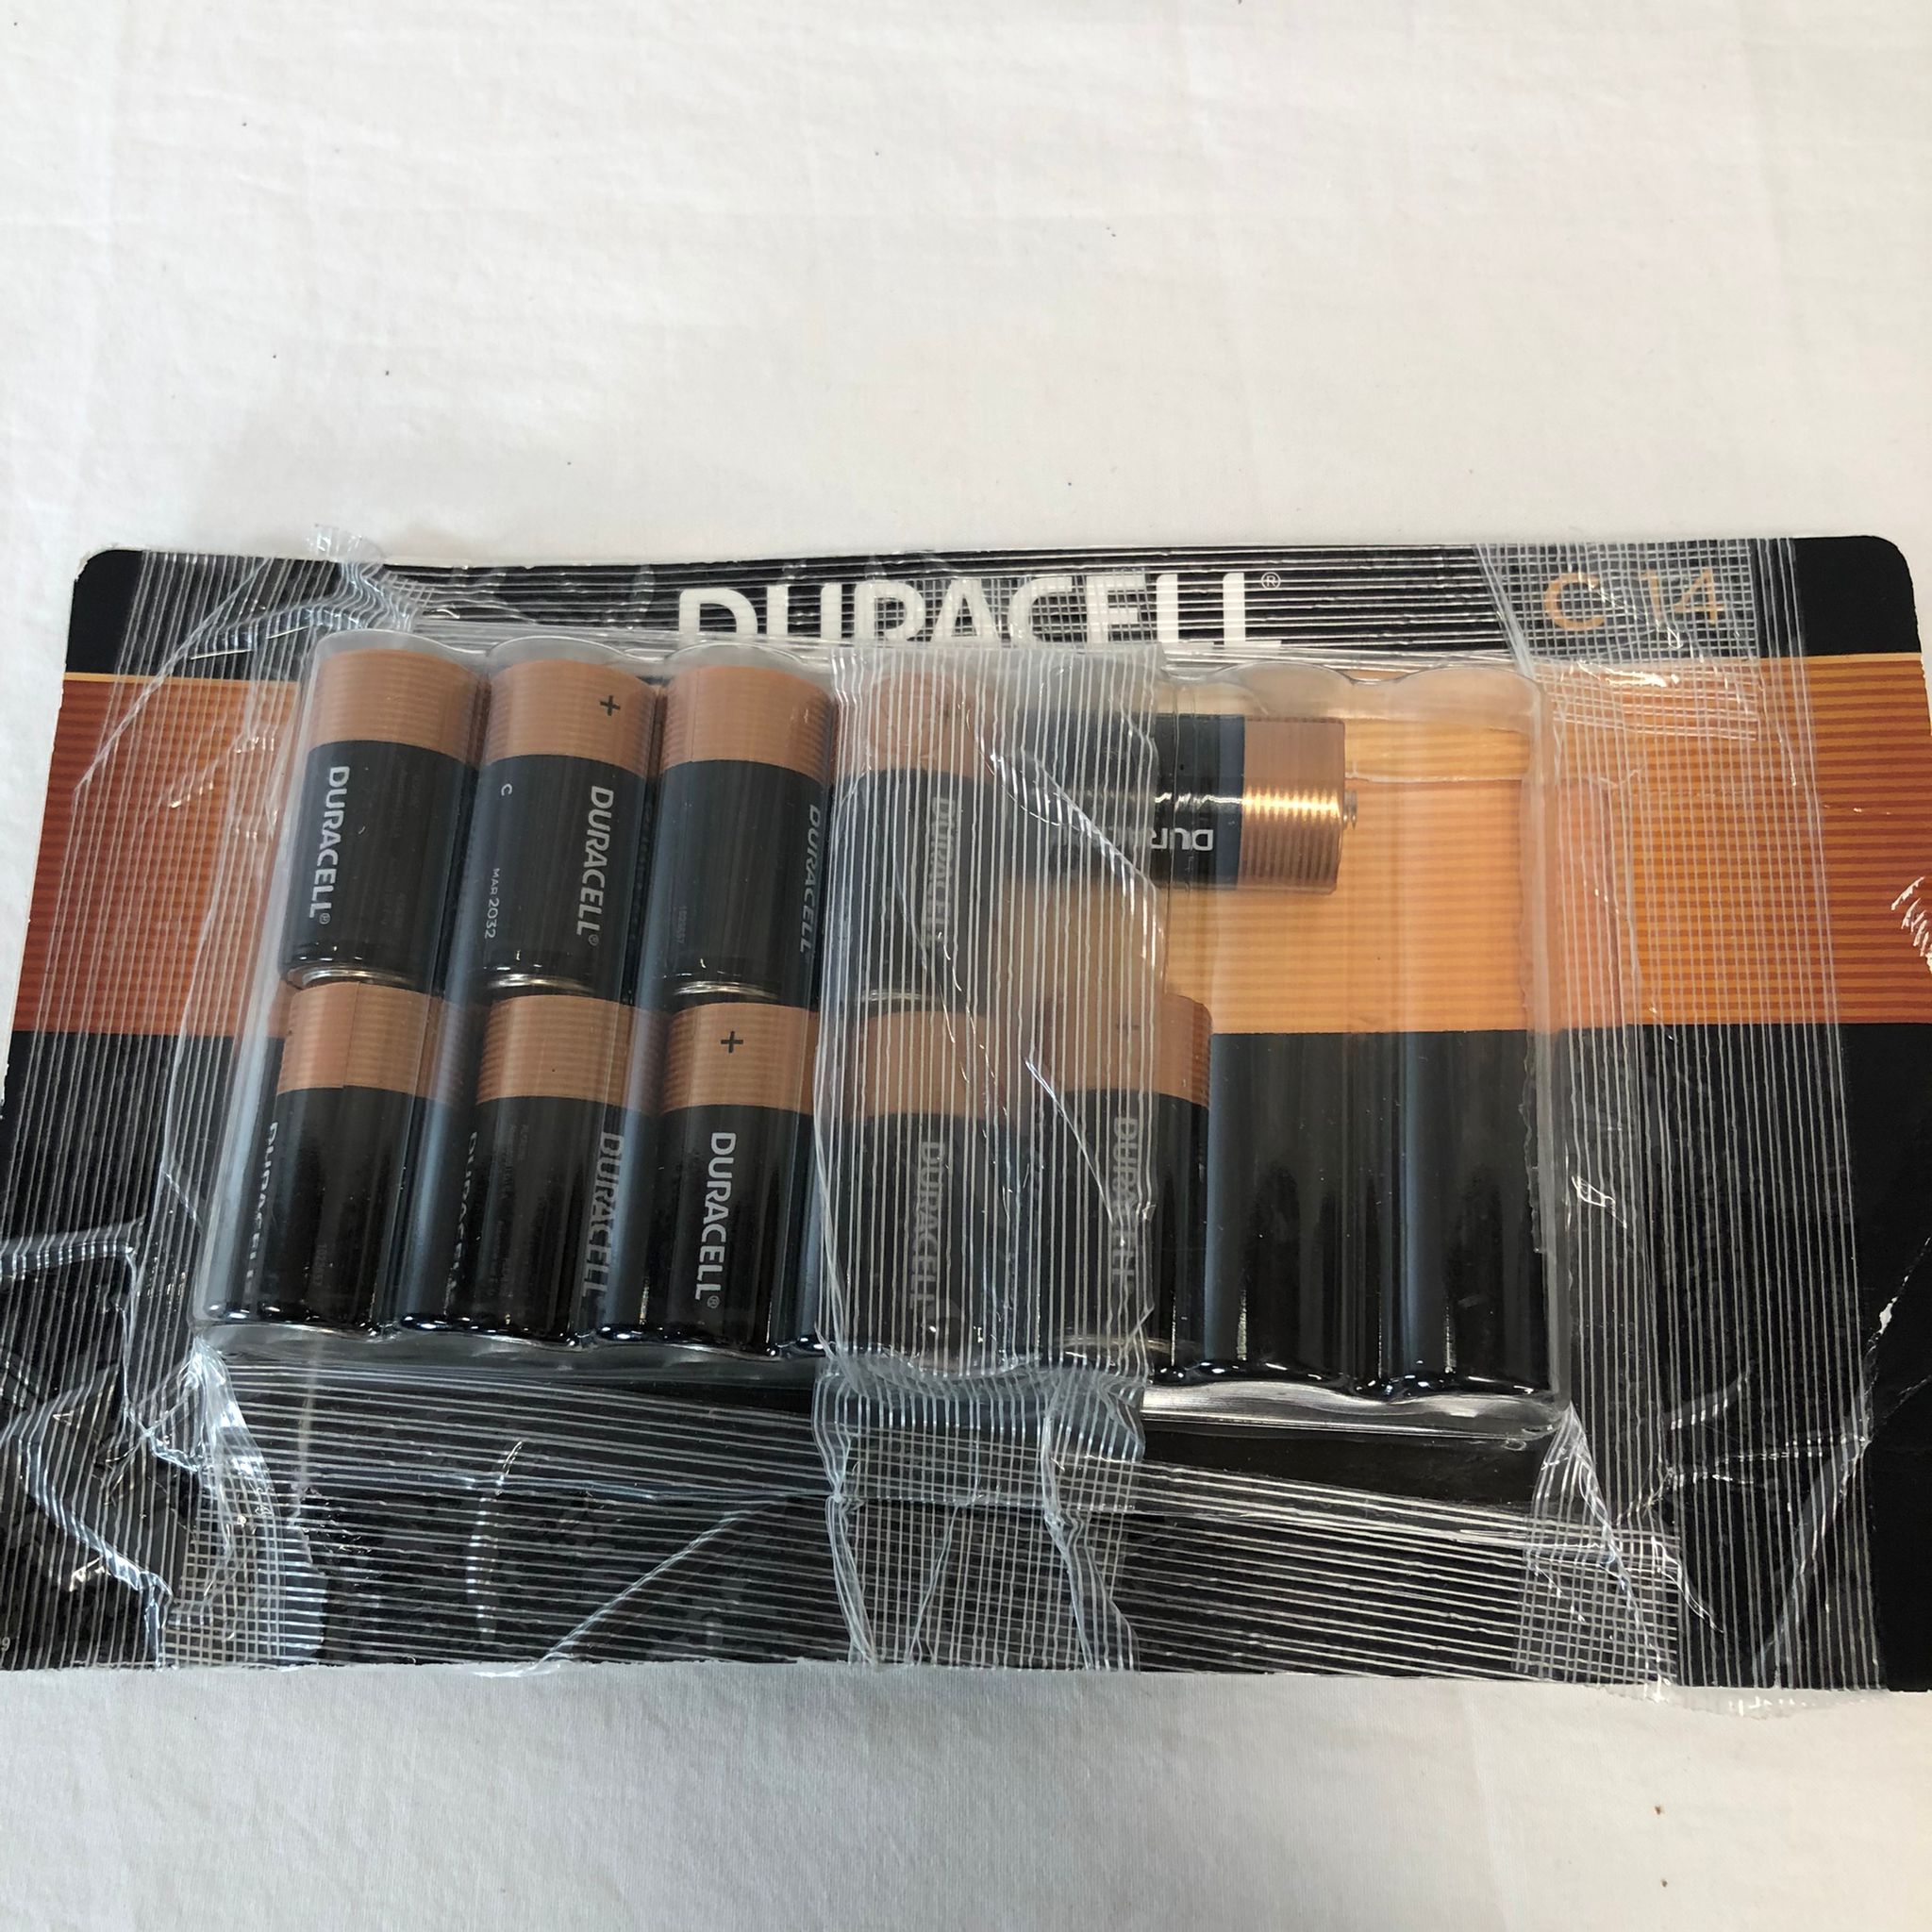 As is Duracell C Alkaline Batteries, 10-count